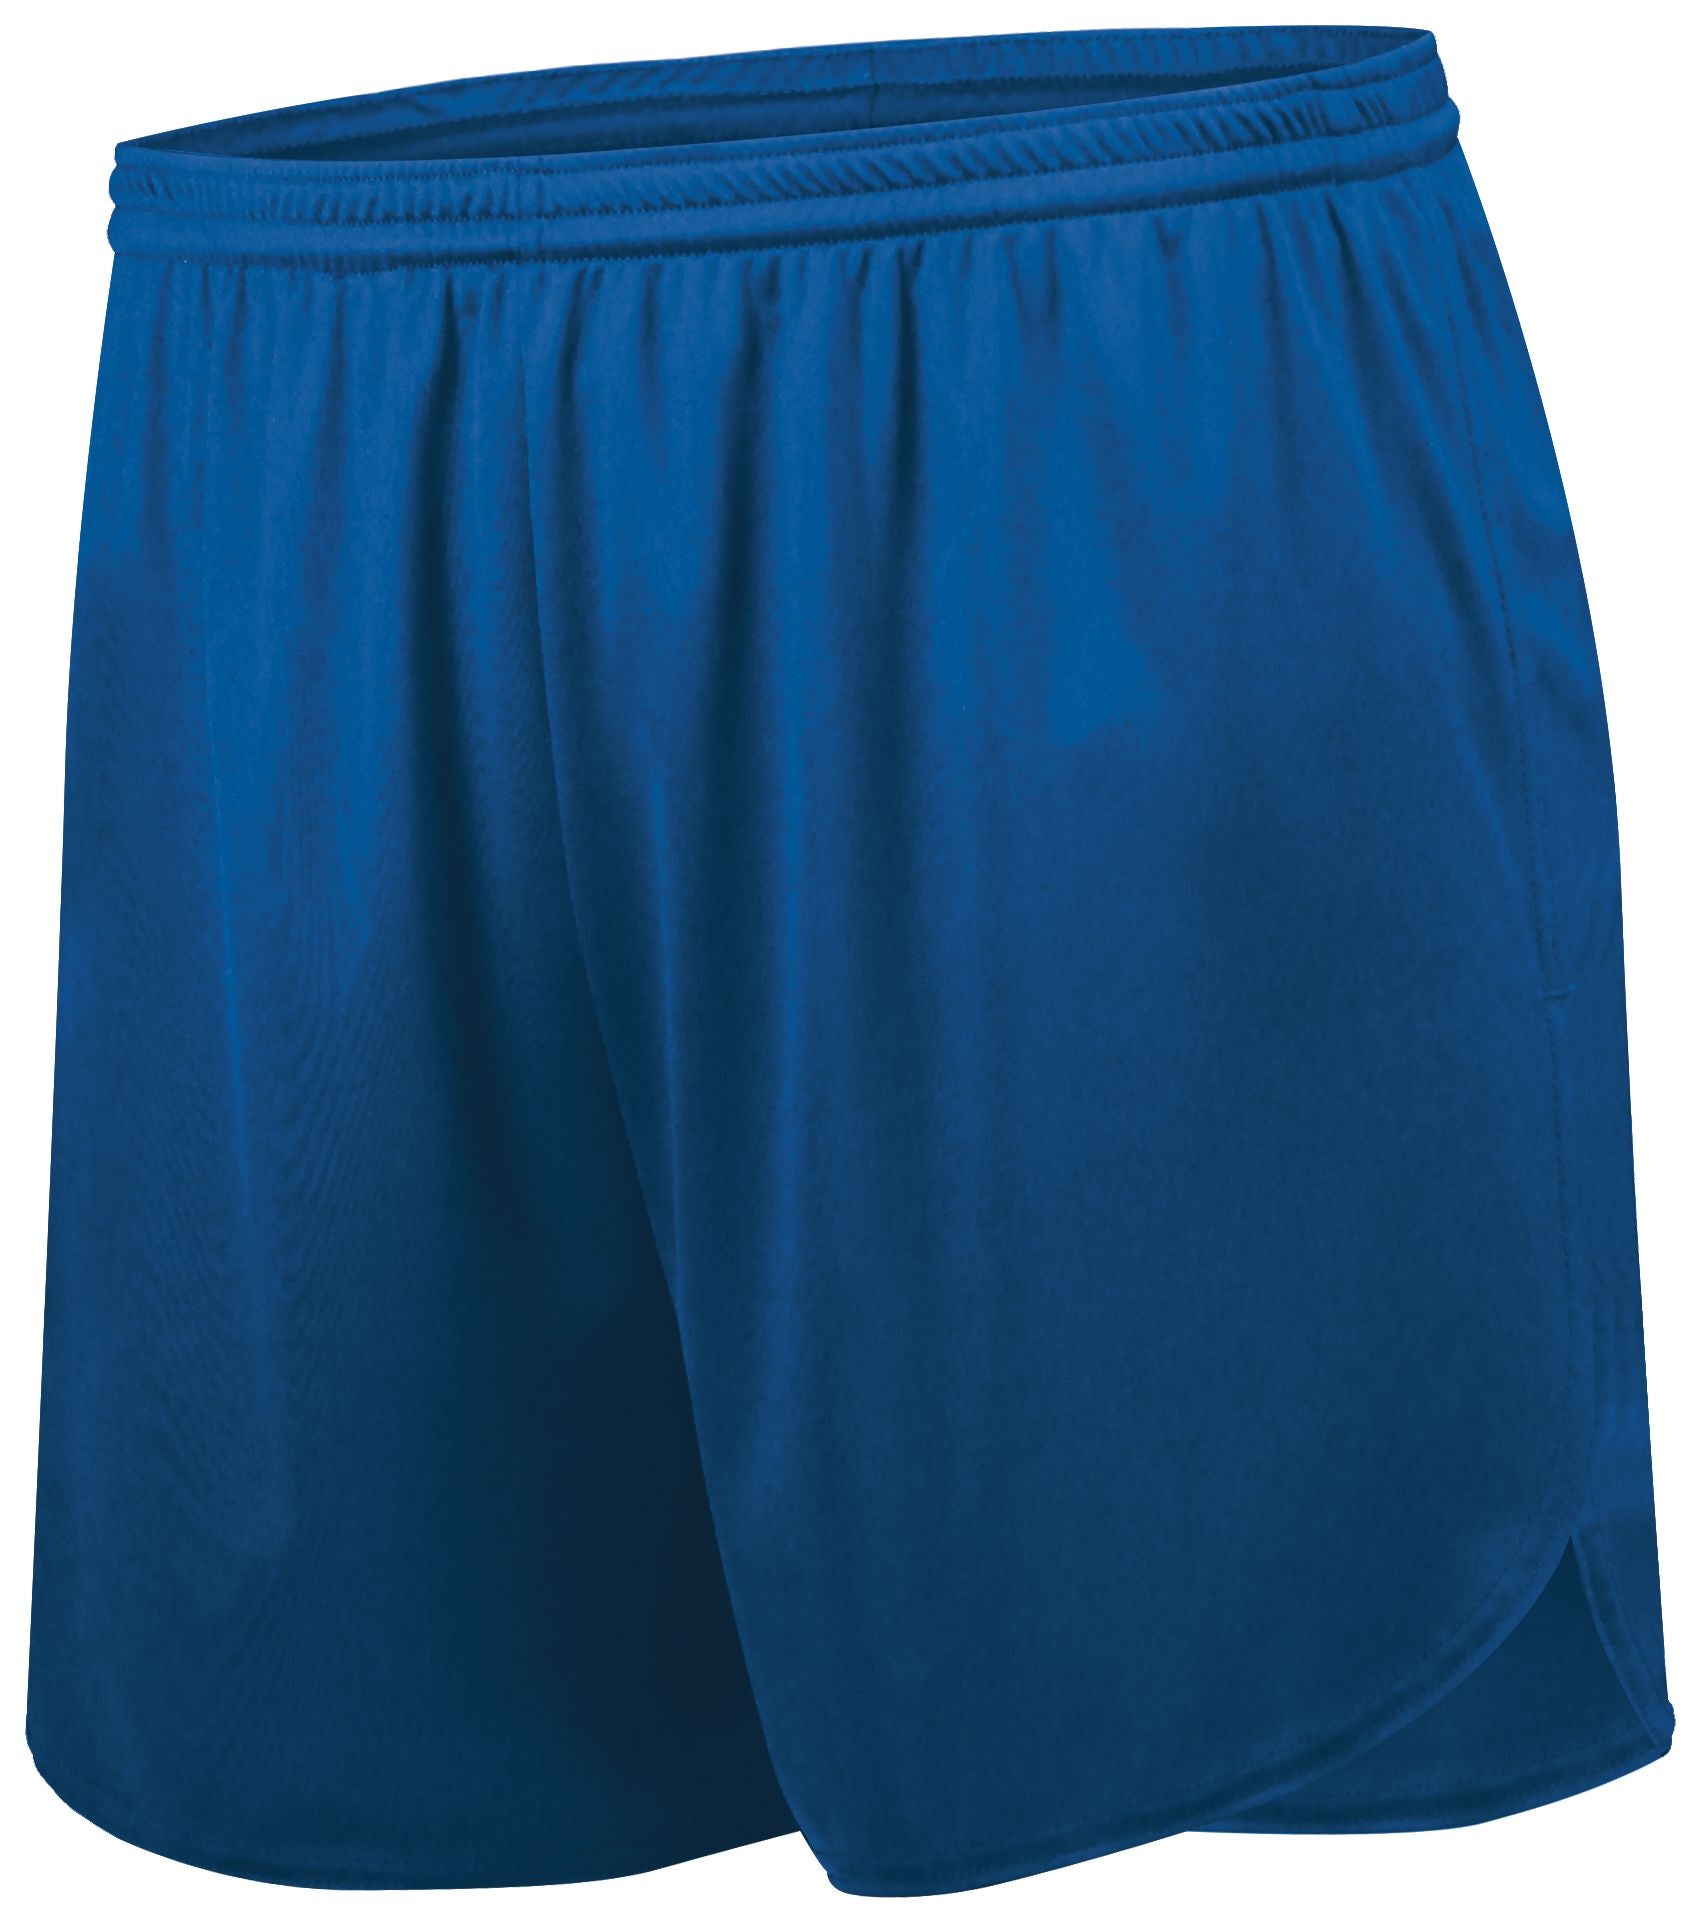 Holloway Pr Max Track Shorts in Royal  -Part of the Adult, Adult-Shorts, Track-Field, Holloway product lines at KanaleyCreations.com